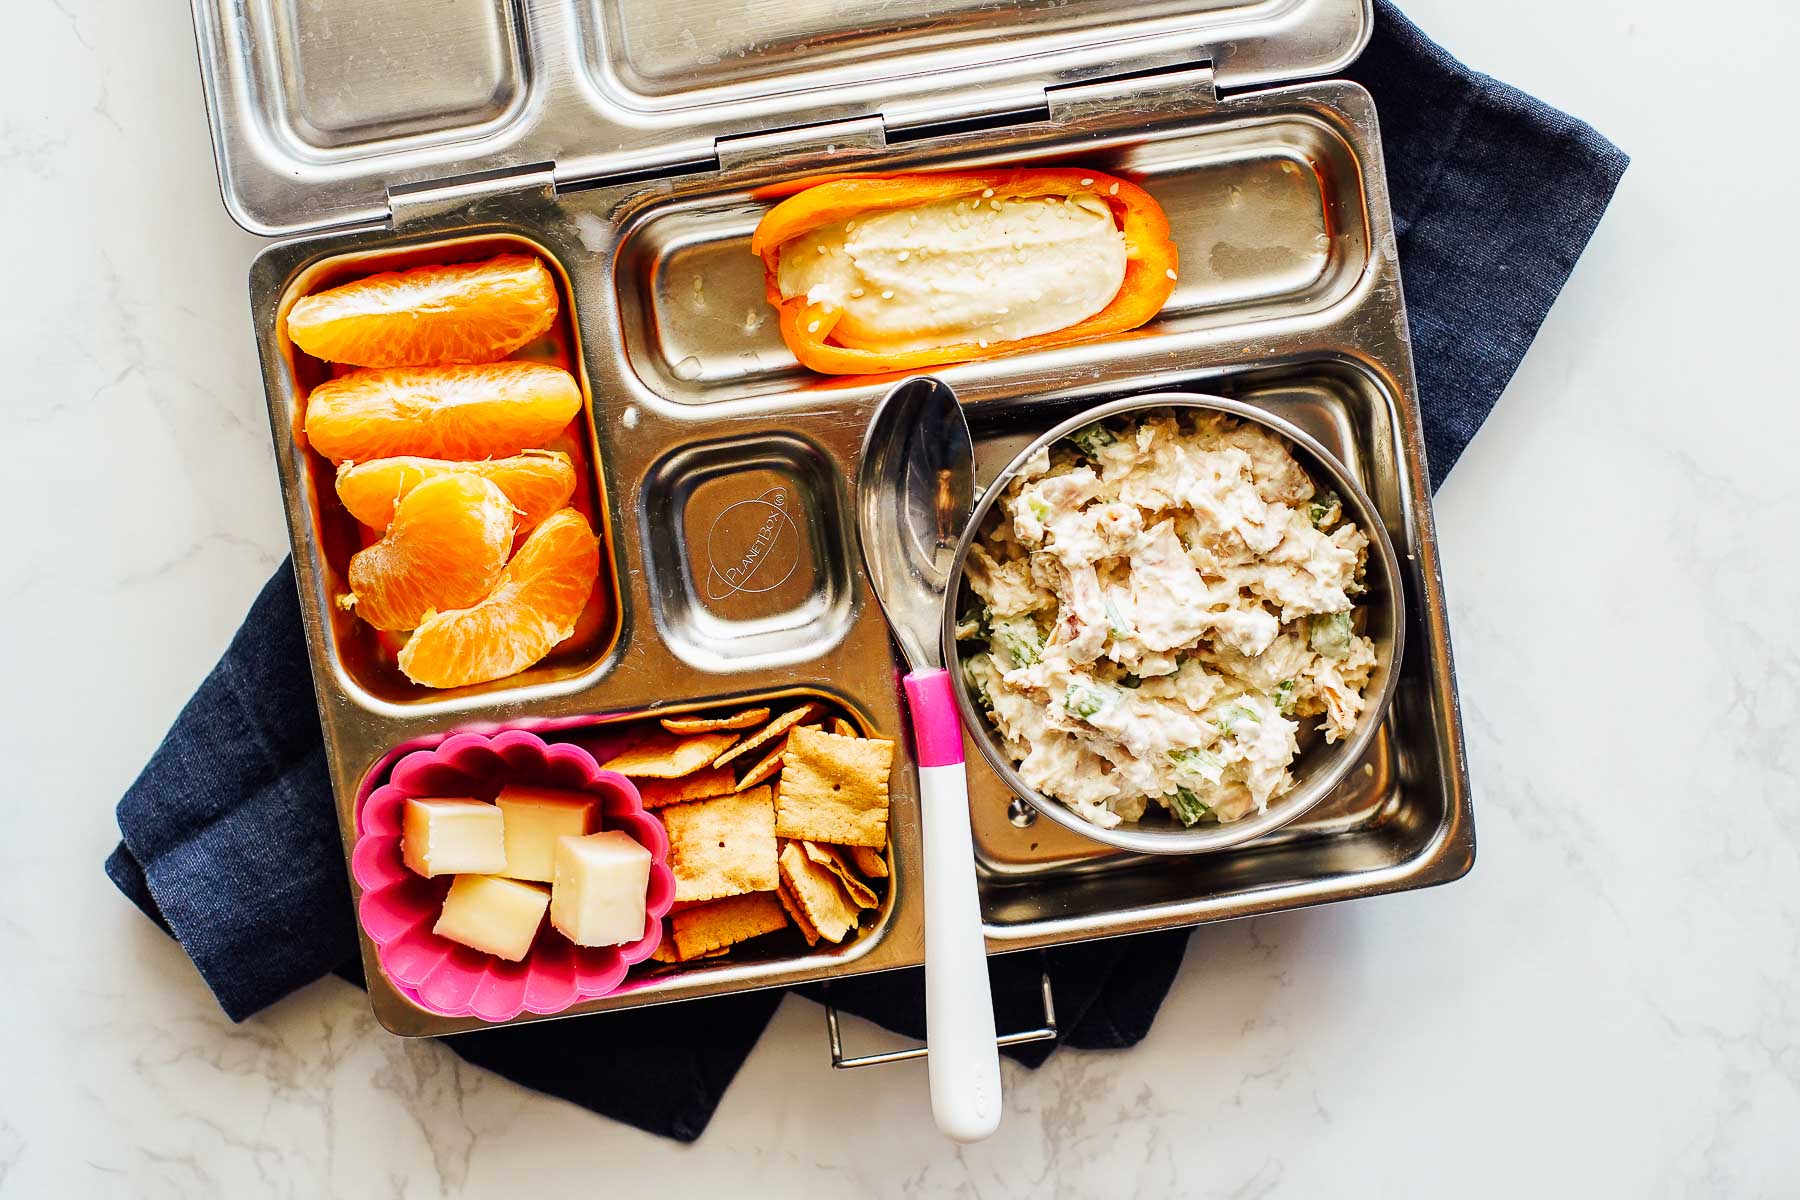 Tuna salad with crackers, cheese cubes, orange slices, and a mini bell pepper with hummus in a bento box.